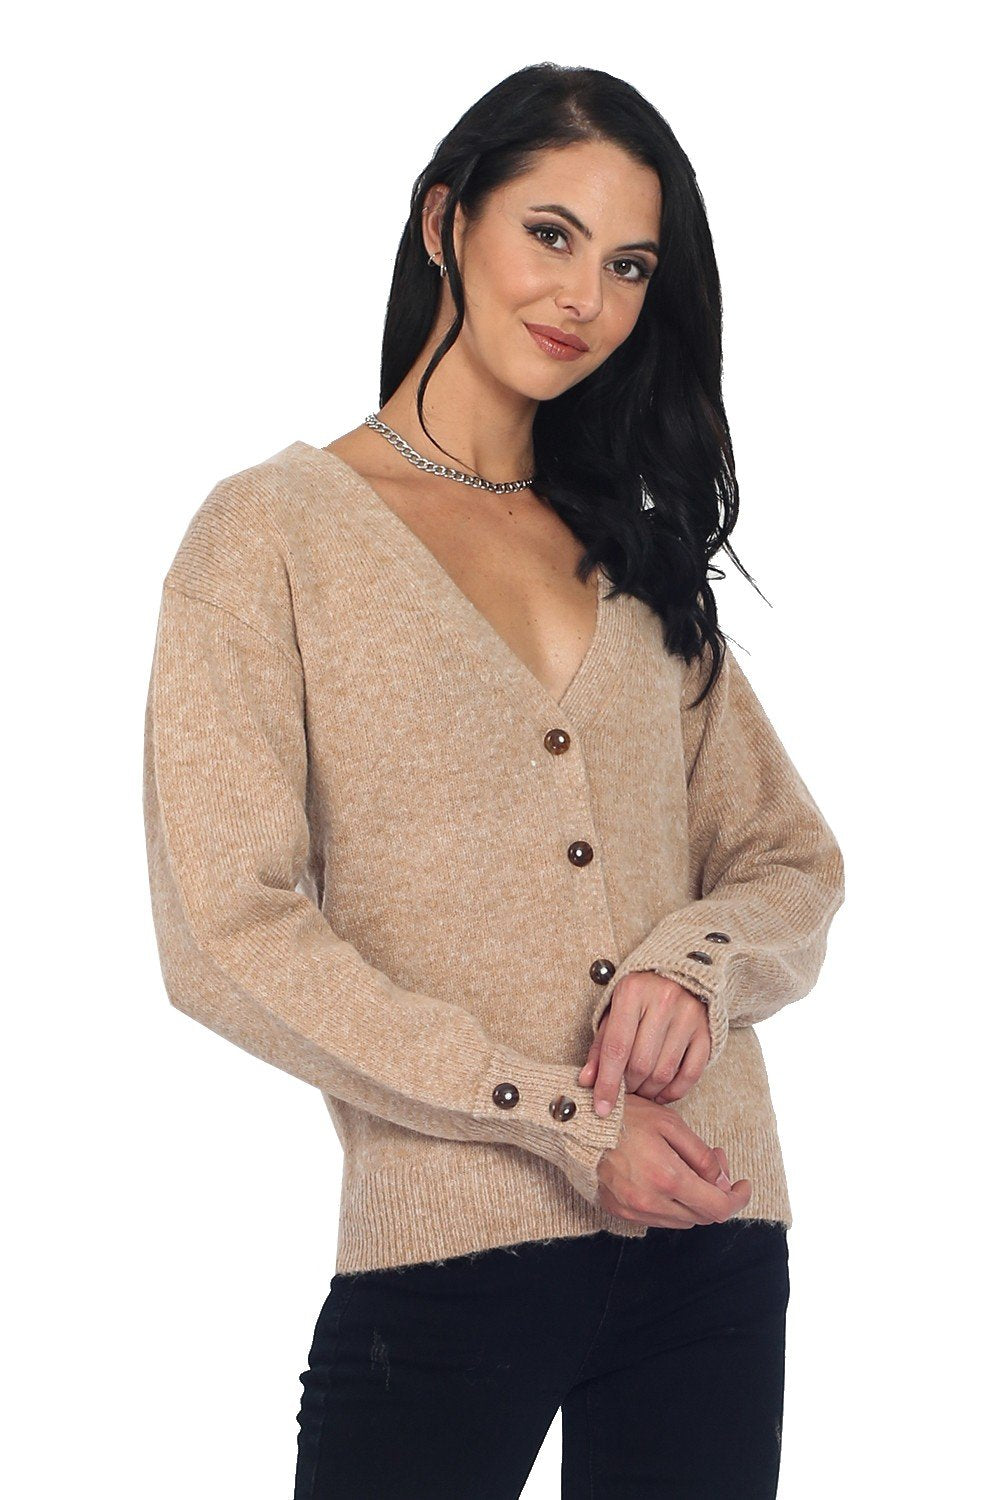 V-NECK CARDIGAN WITH BUTTONING TABS AND RUFFLED CUFFS